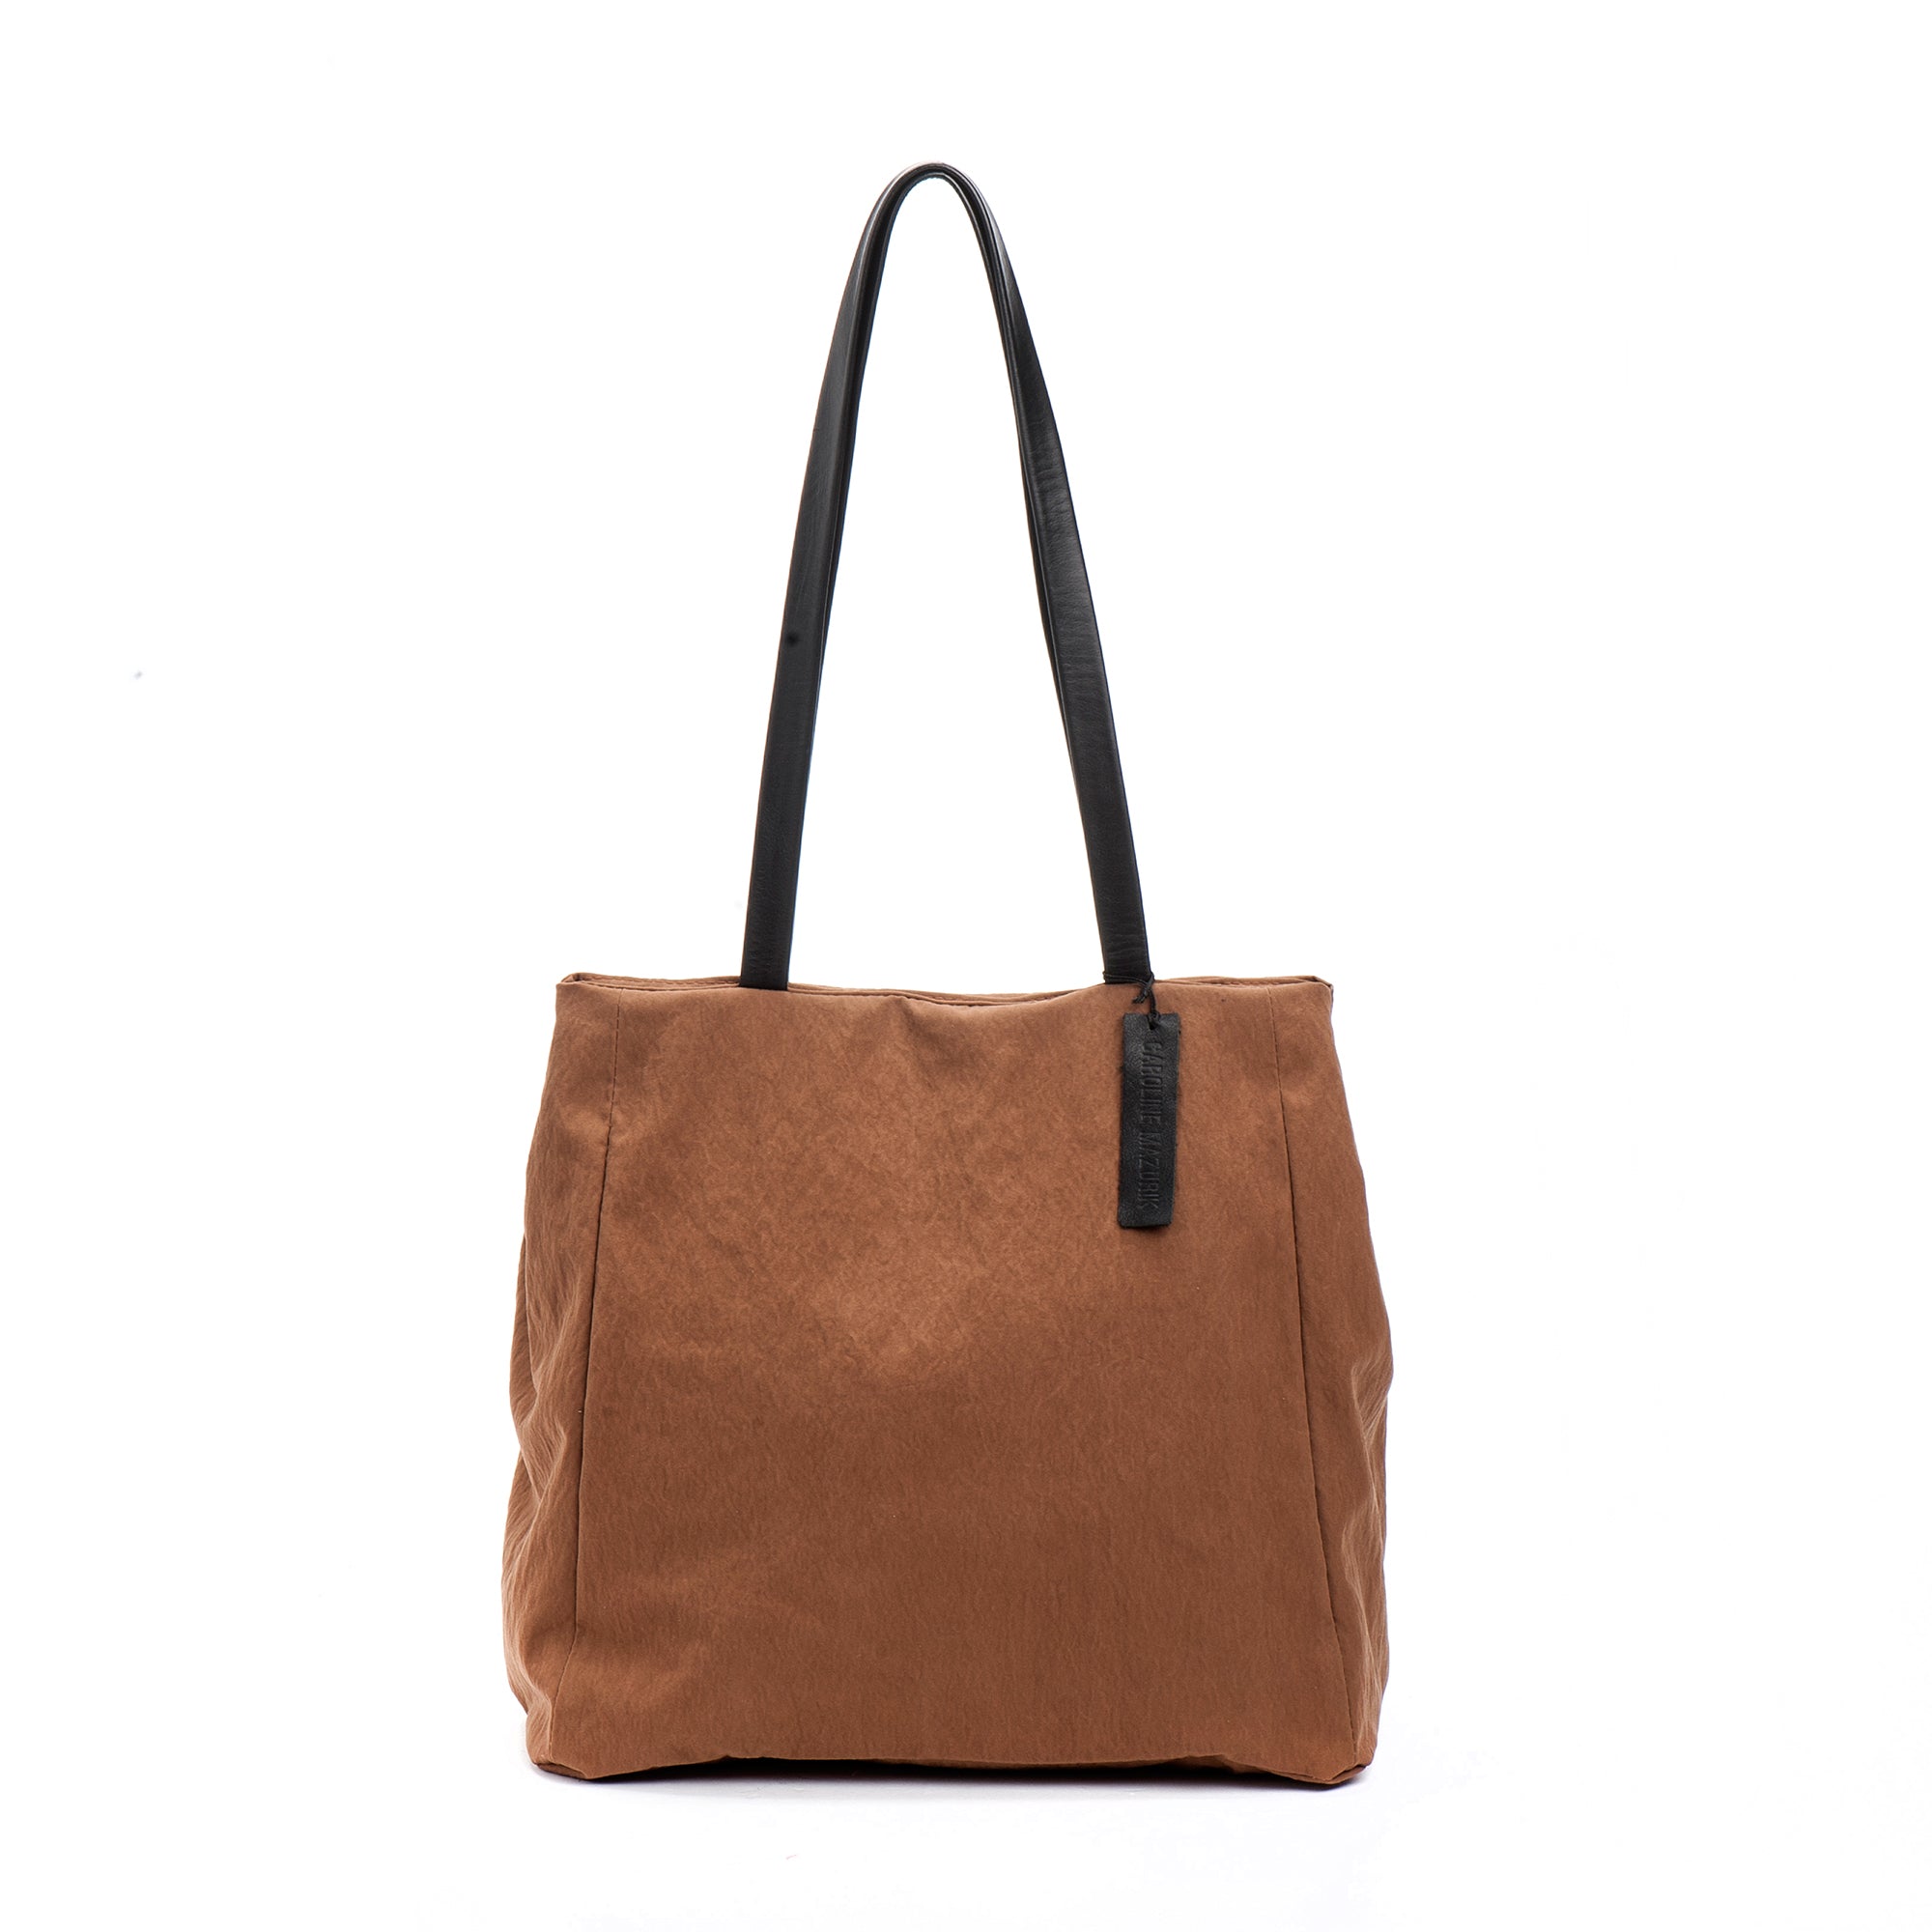 Dark Brown Shoulder Fabric Bag, Lightweight Tote bag with leather handles